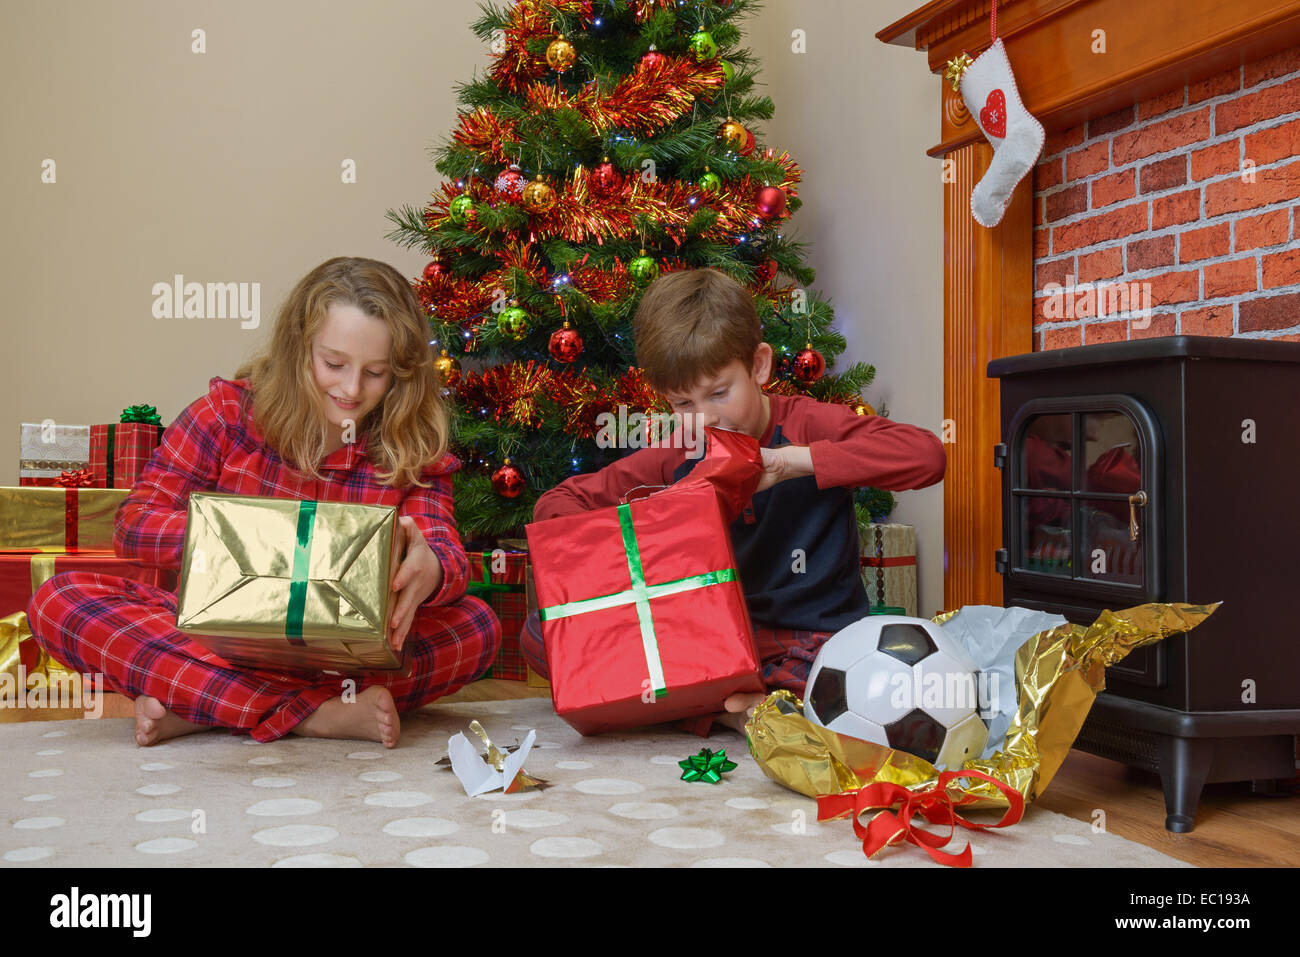 Two children, a boy and a girl, opening their presents on Christmas morning. Stock Photo